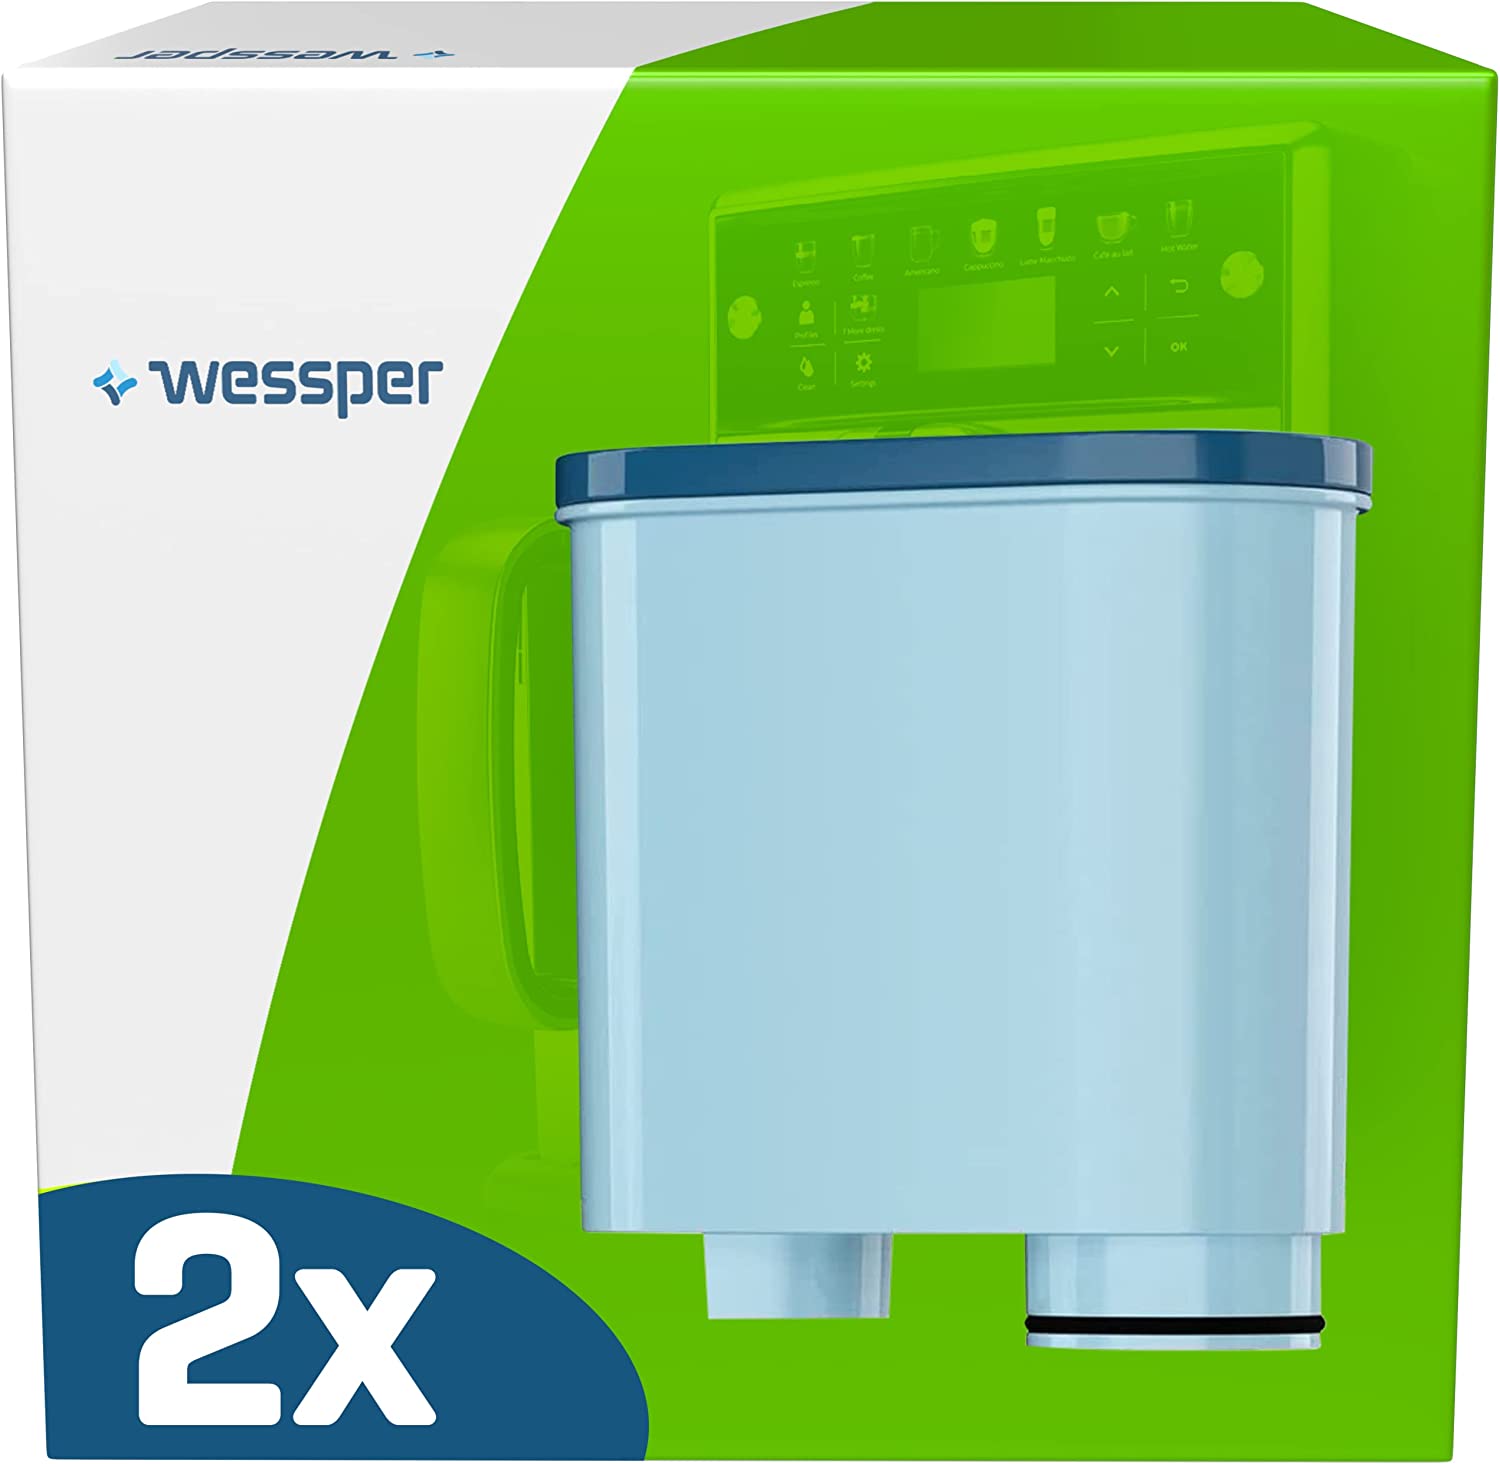 WESSPER Wessper Aquaclean Fully Automatic Coffee Machine Water Filter for Saeco and Philips Fully Automatic Coffee Machines Pack of 4